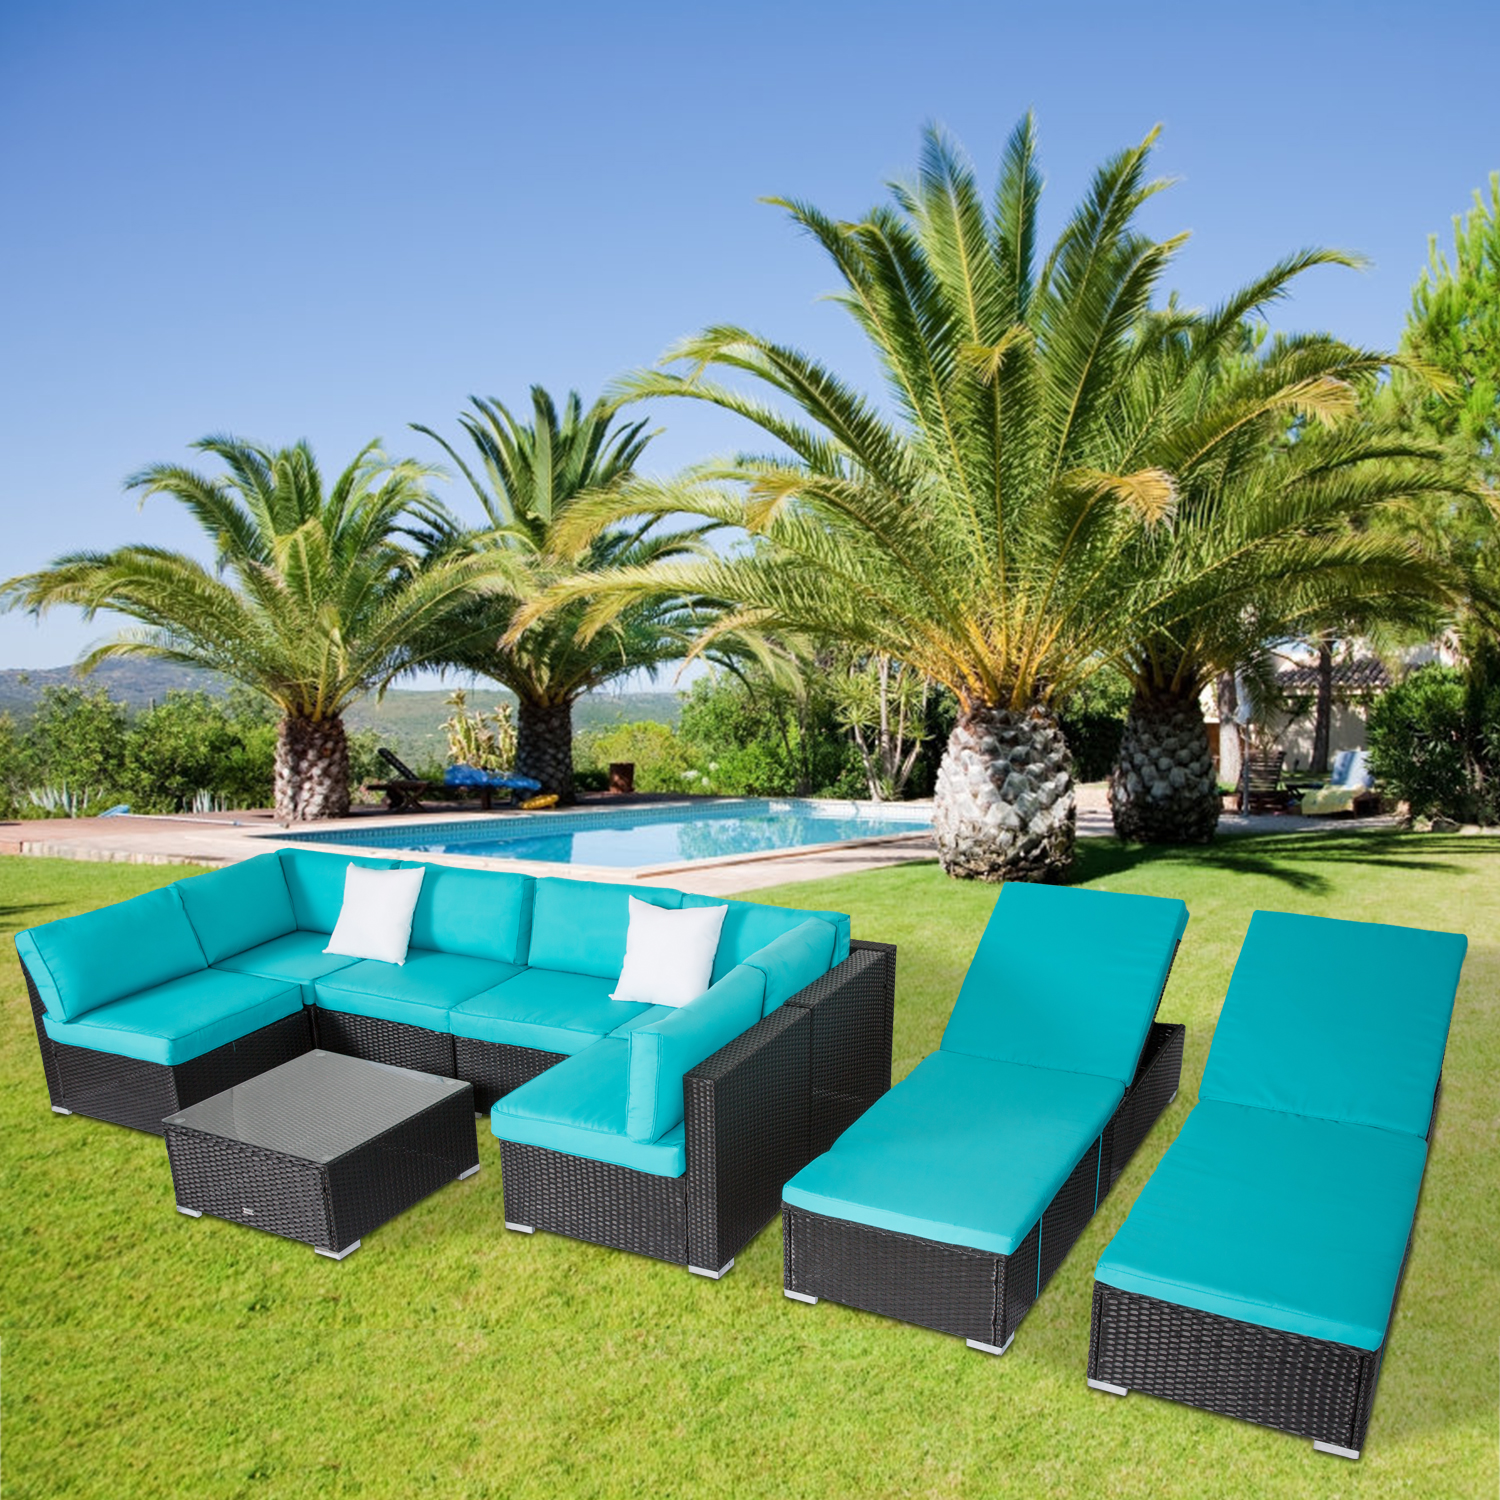 Kinbor 9 Pieces Outdoor Patio Rattan Wicker Sofa Sectional Set with Chaise Lounge